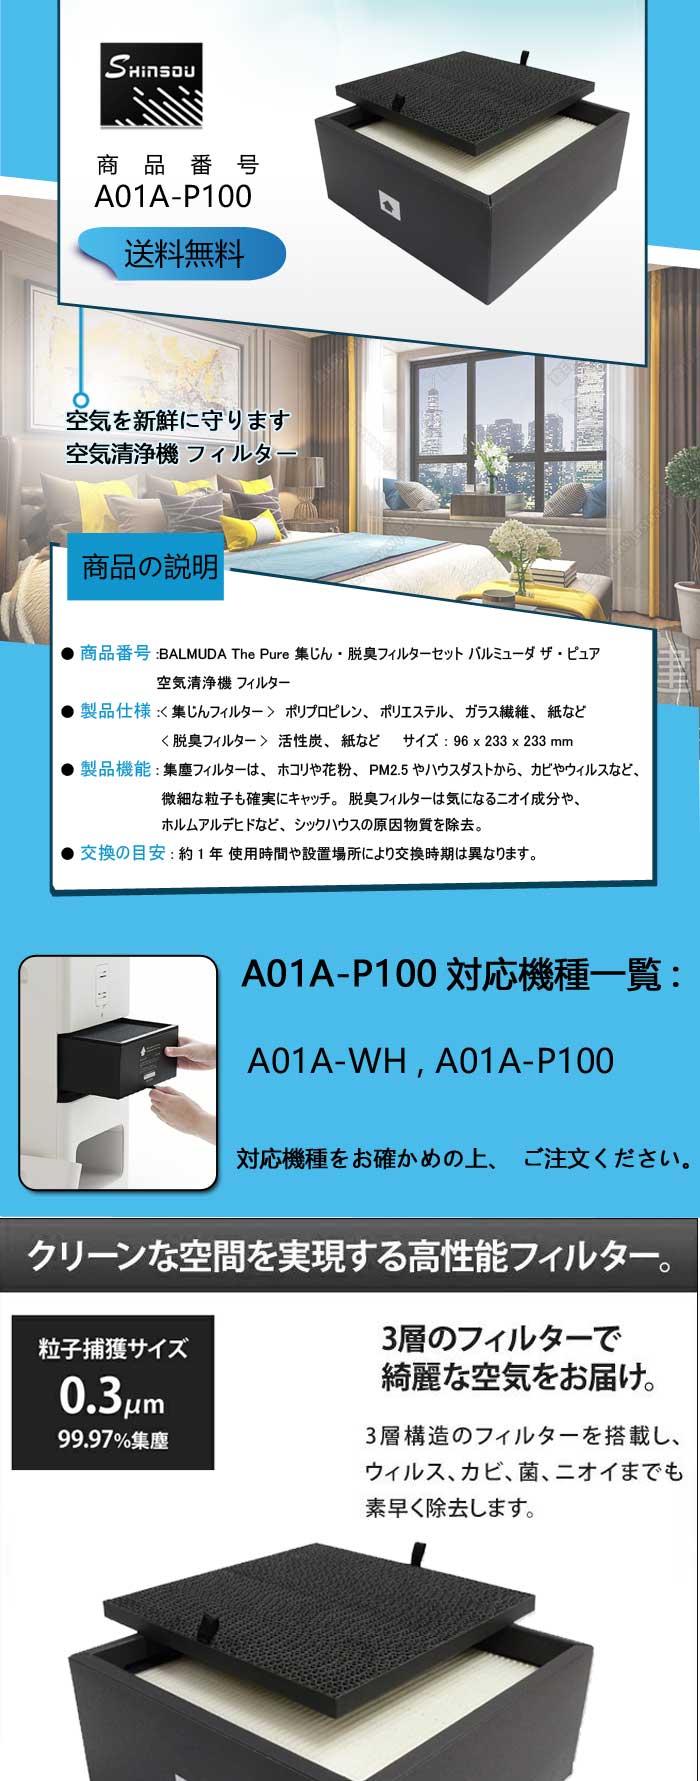 BALMUDA The Pure A01A-P100 集じん・脱臭フィルターセット バルミューダ ザ・ピュア 空気清浄機 フィルター。1セット「互換品」  空気清浄機